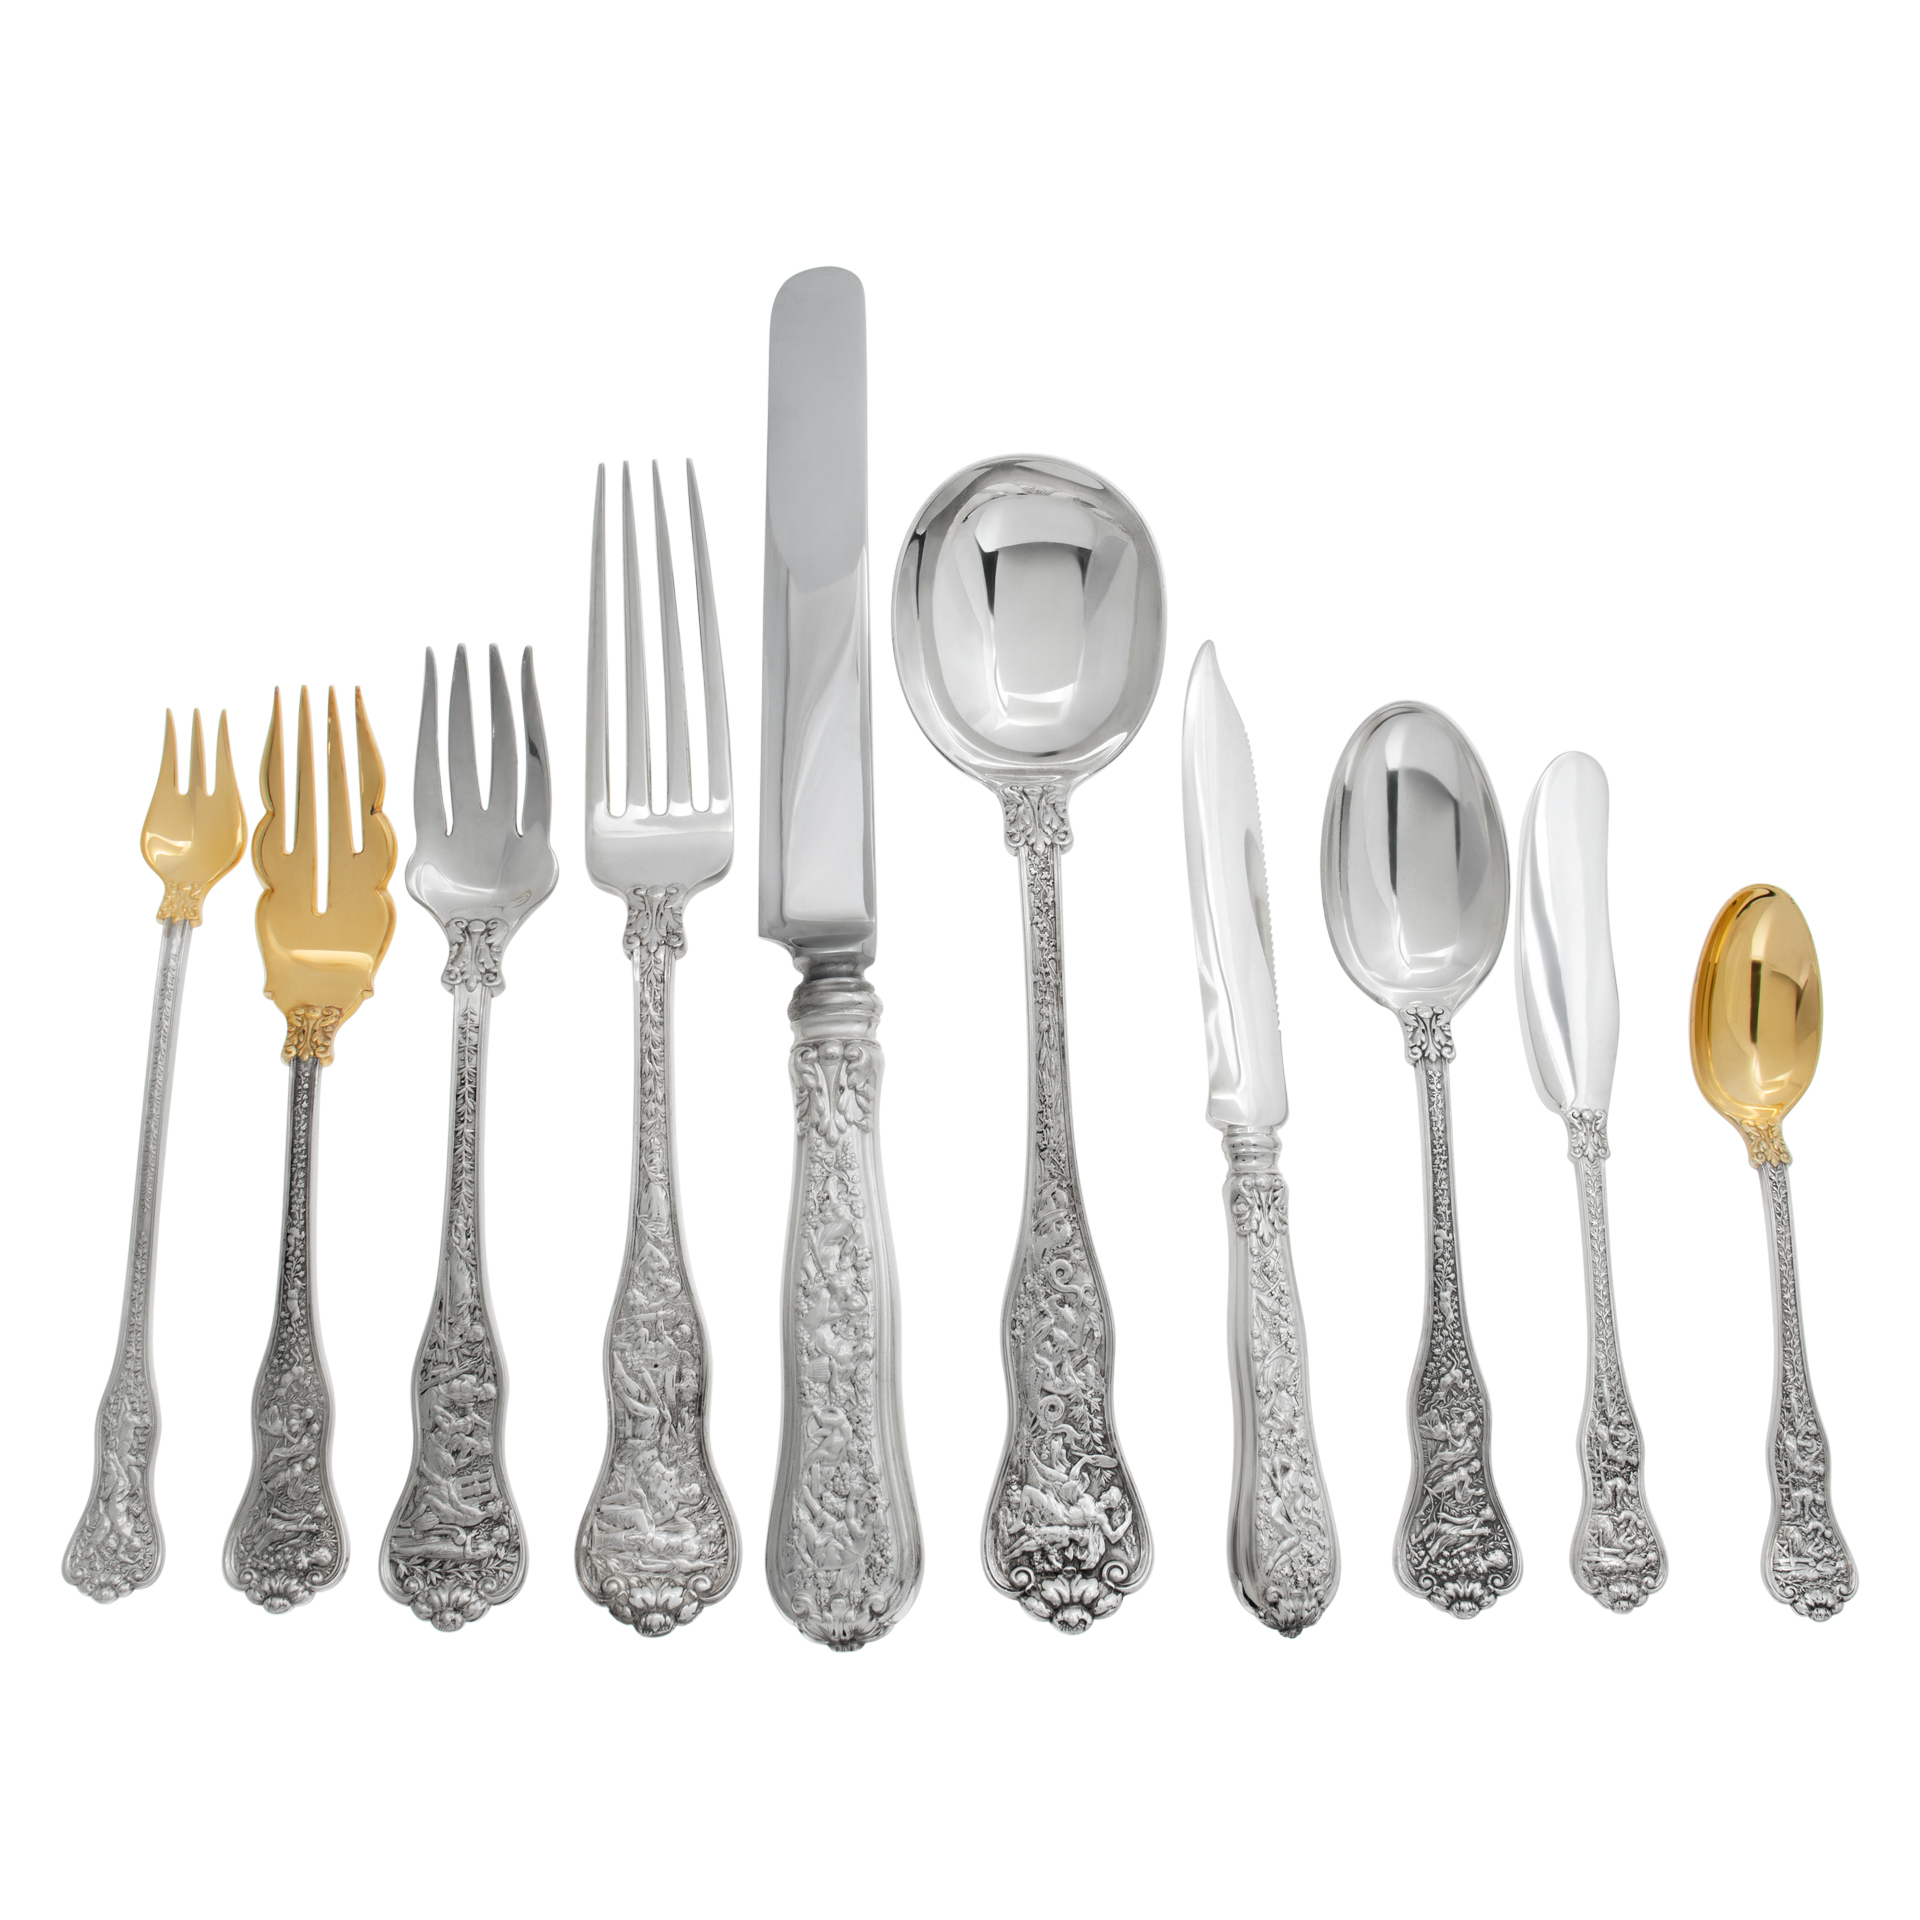 OLYMPIAN, 133 pieces Sterling Silver flatware set, Ptd 1878 By Tiffany & Co image 1